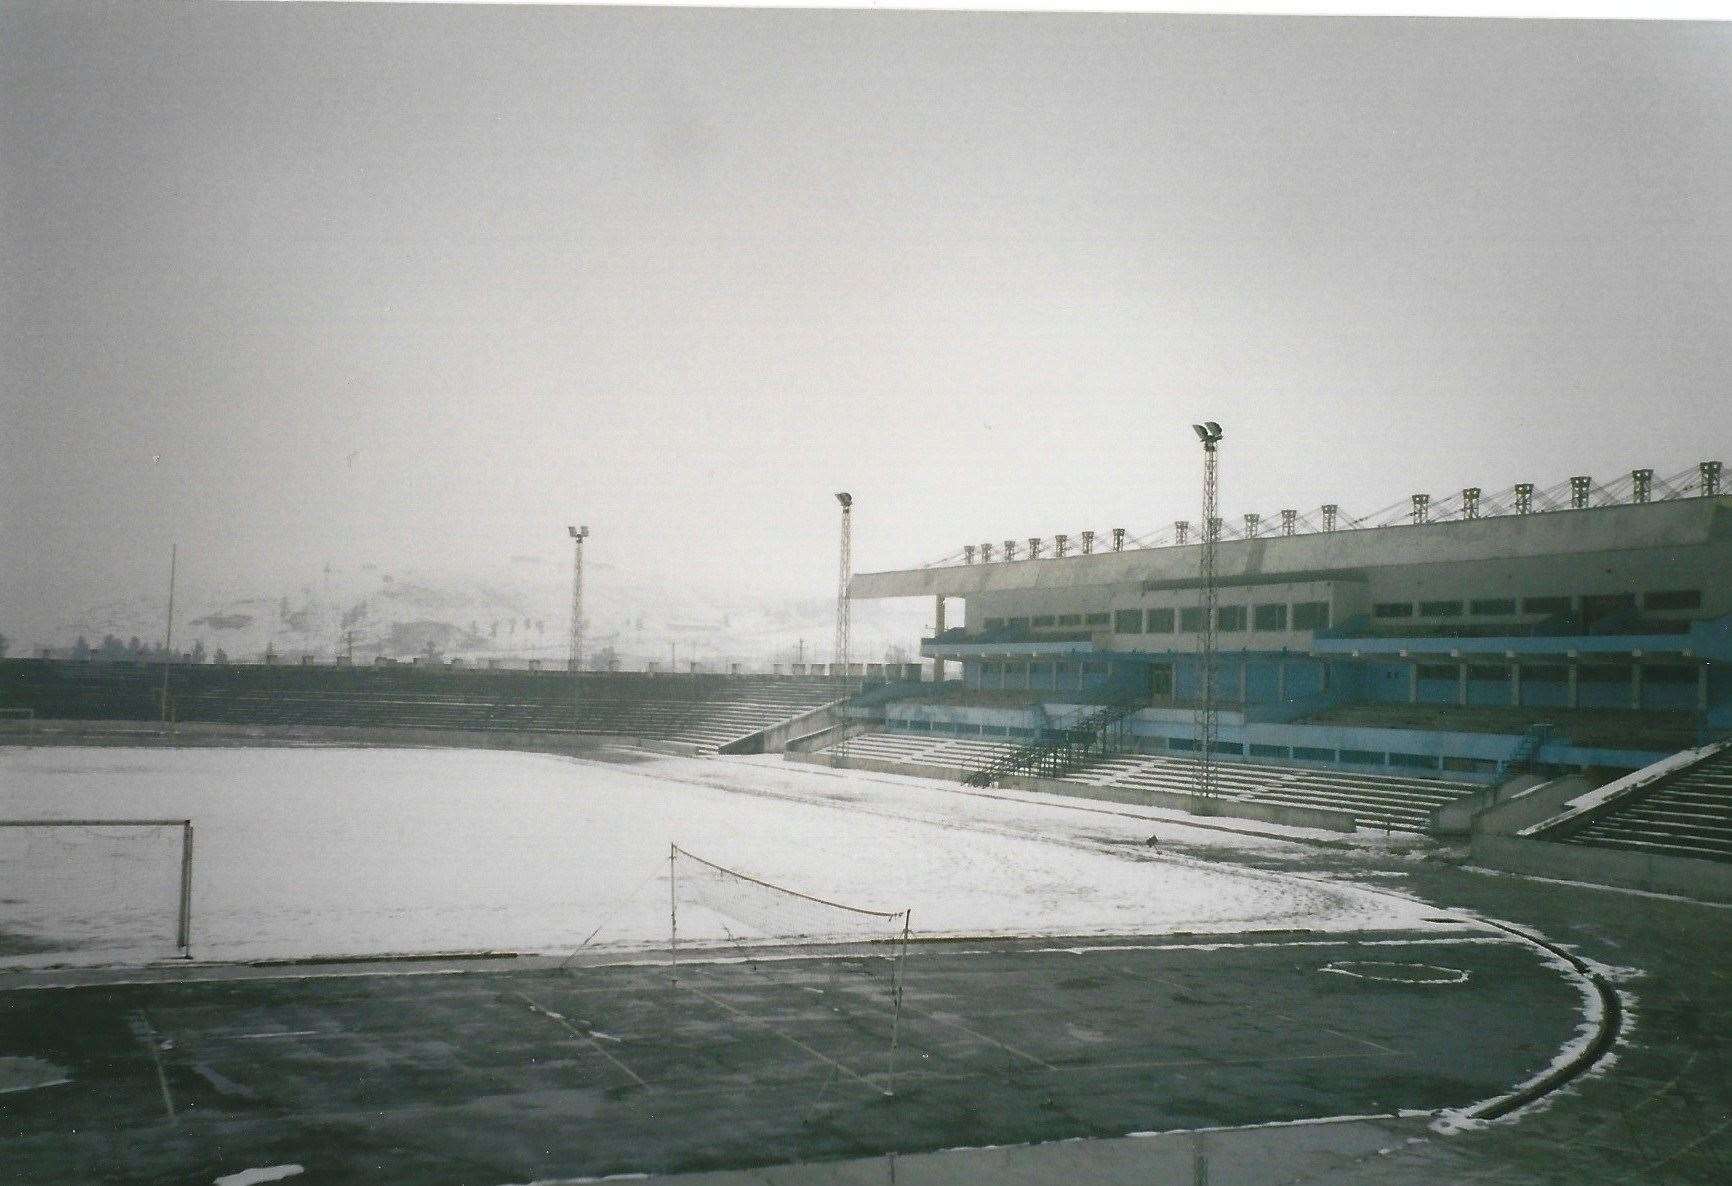 The National Stadium in Kabul - site of mass executions by the Taliban